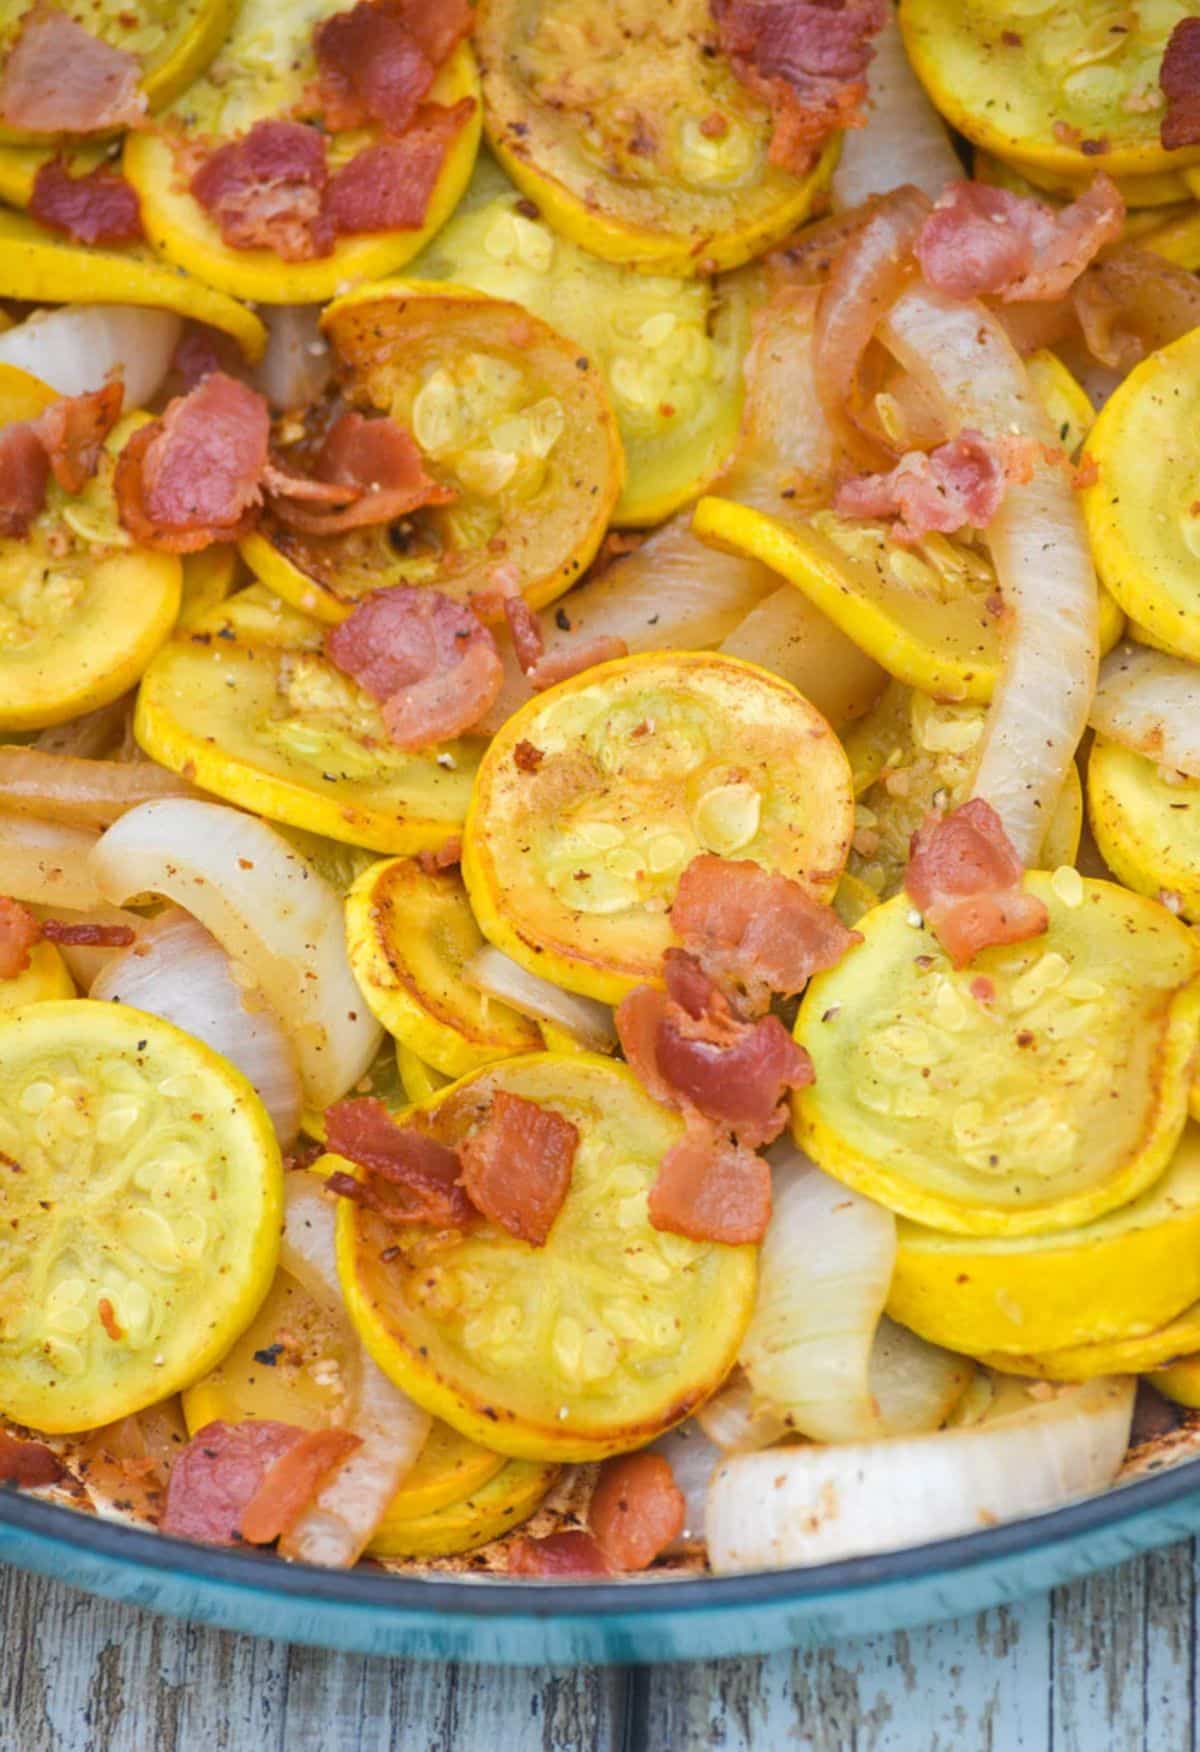 Sauteed summer squash with bacon and onions in a bowl.